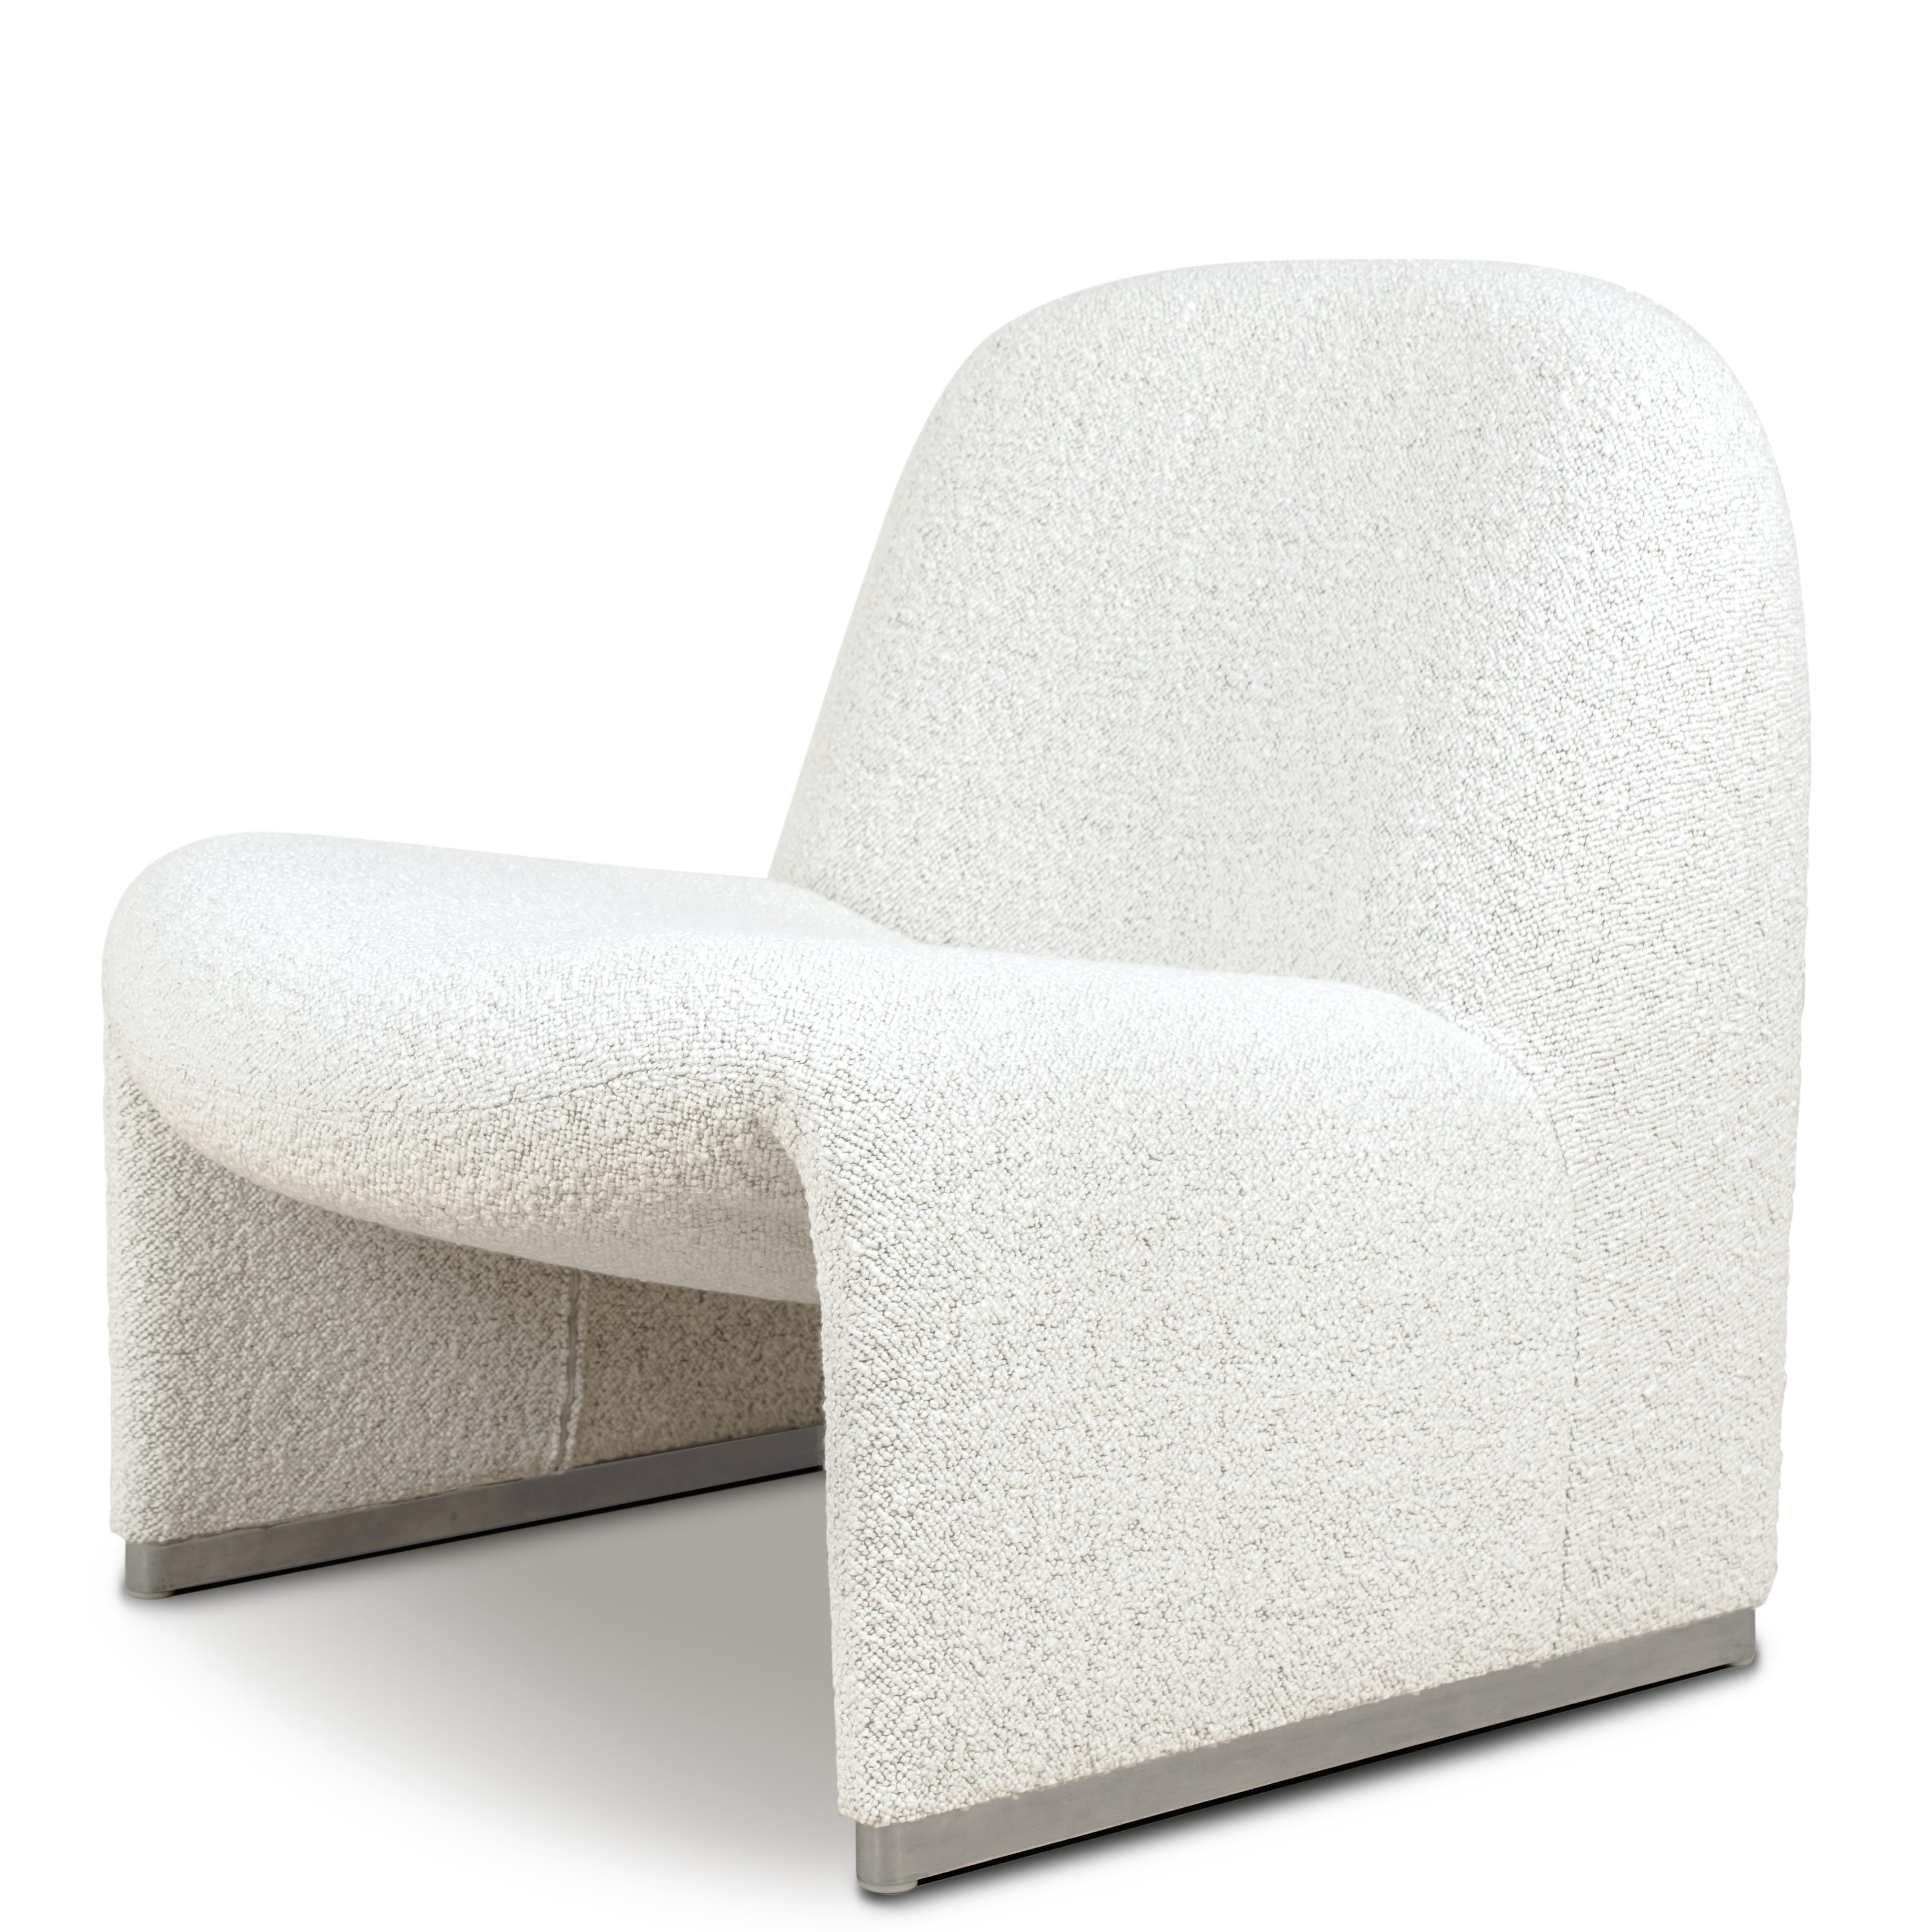 Late 20th Century Pair of “Alky” Chairs by G. Piretti for Castelli New Upholstery Boucle by Dedar